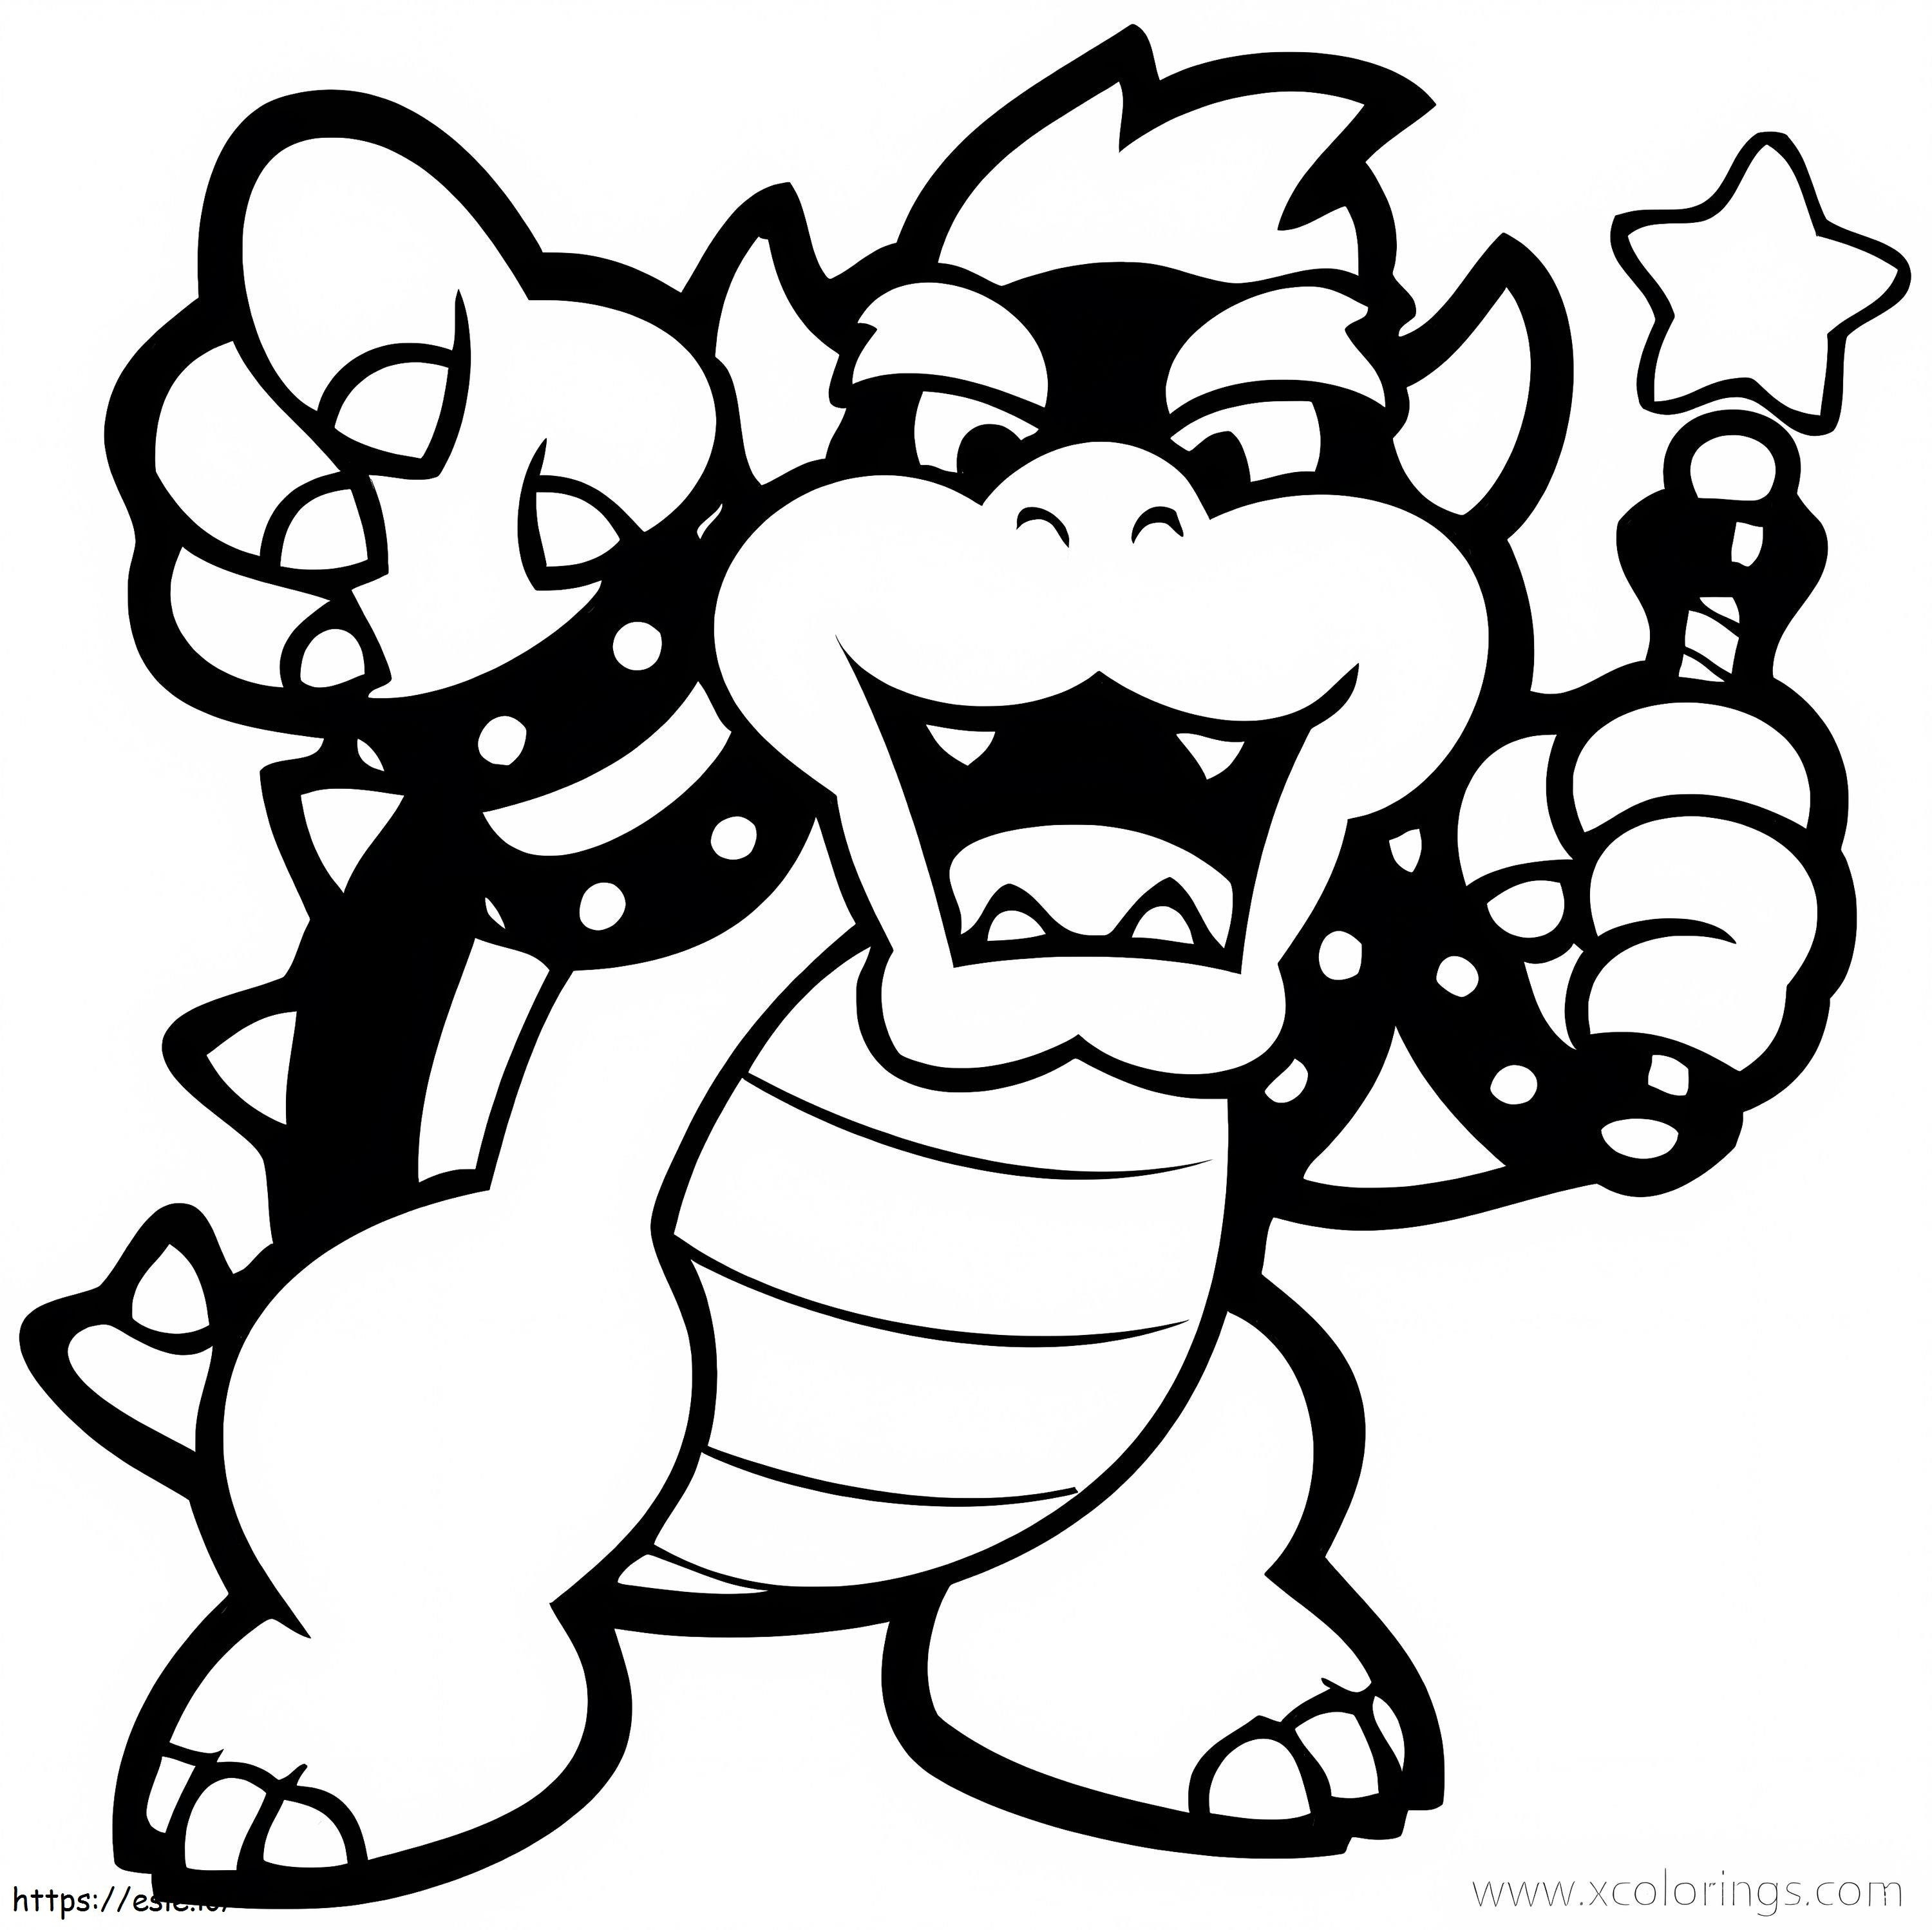 Bowser 7 coloring page